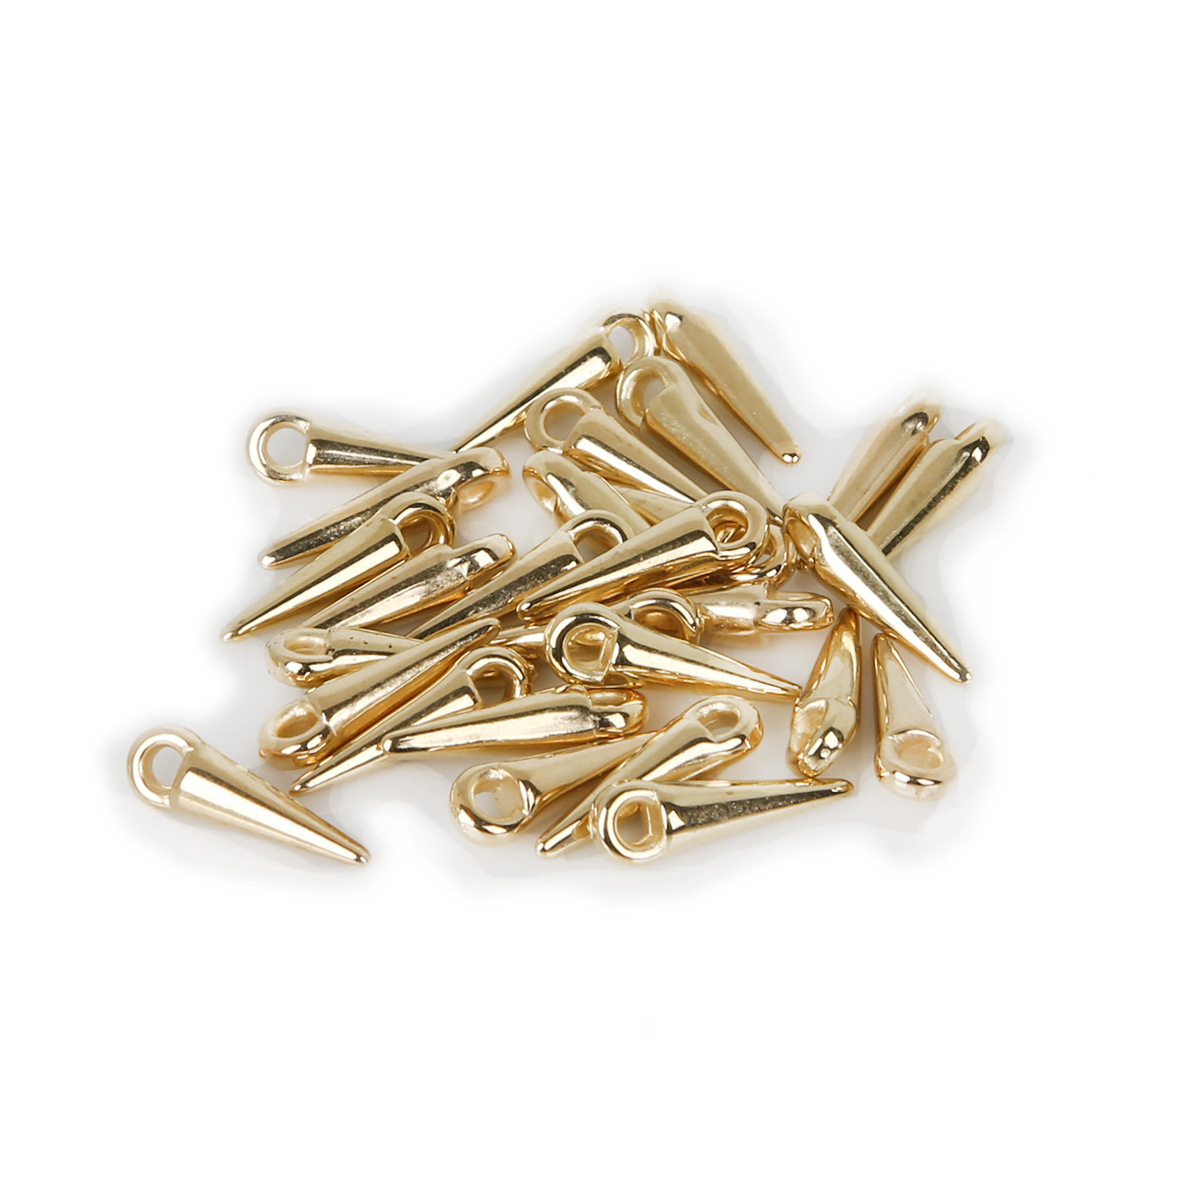 Gold Spike Pendant 4 x 13 mm approximately 200 pieces / bag